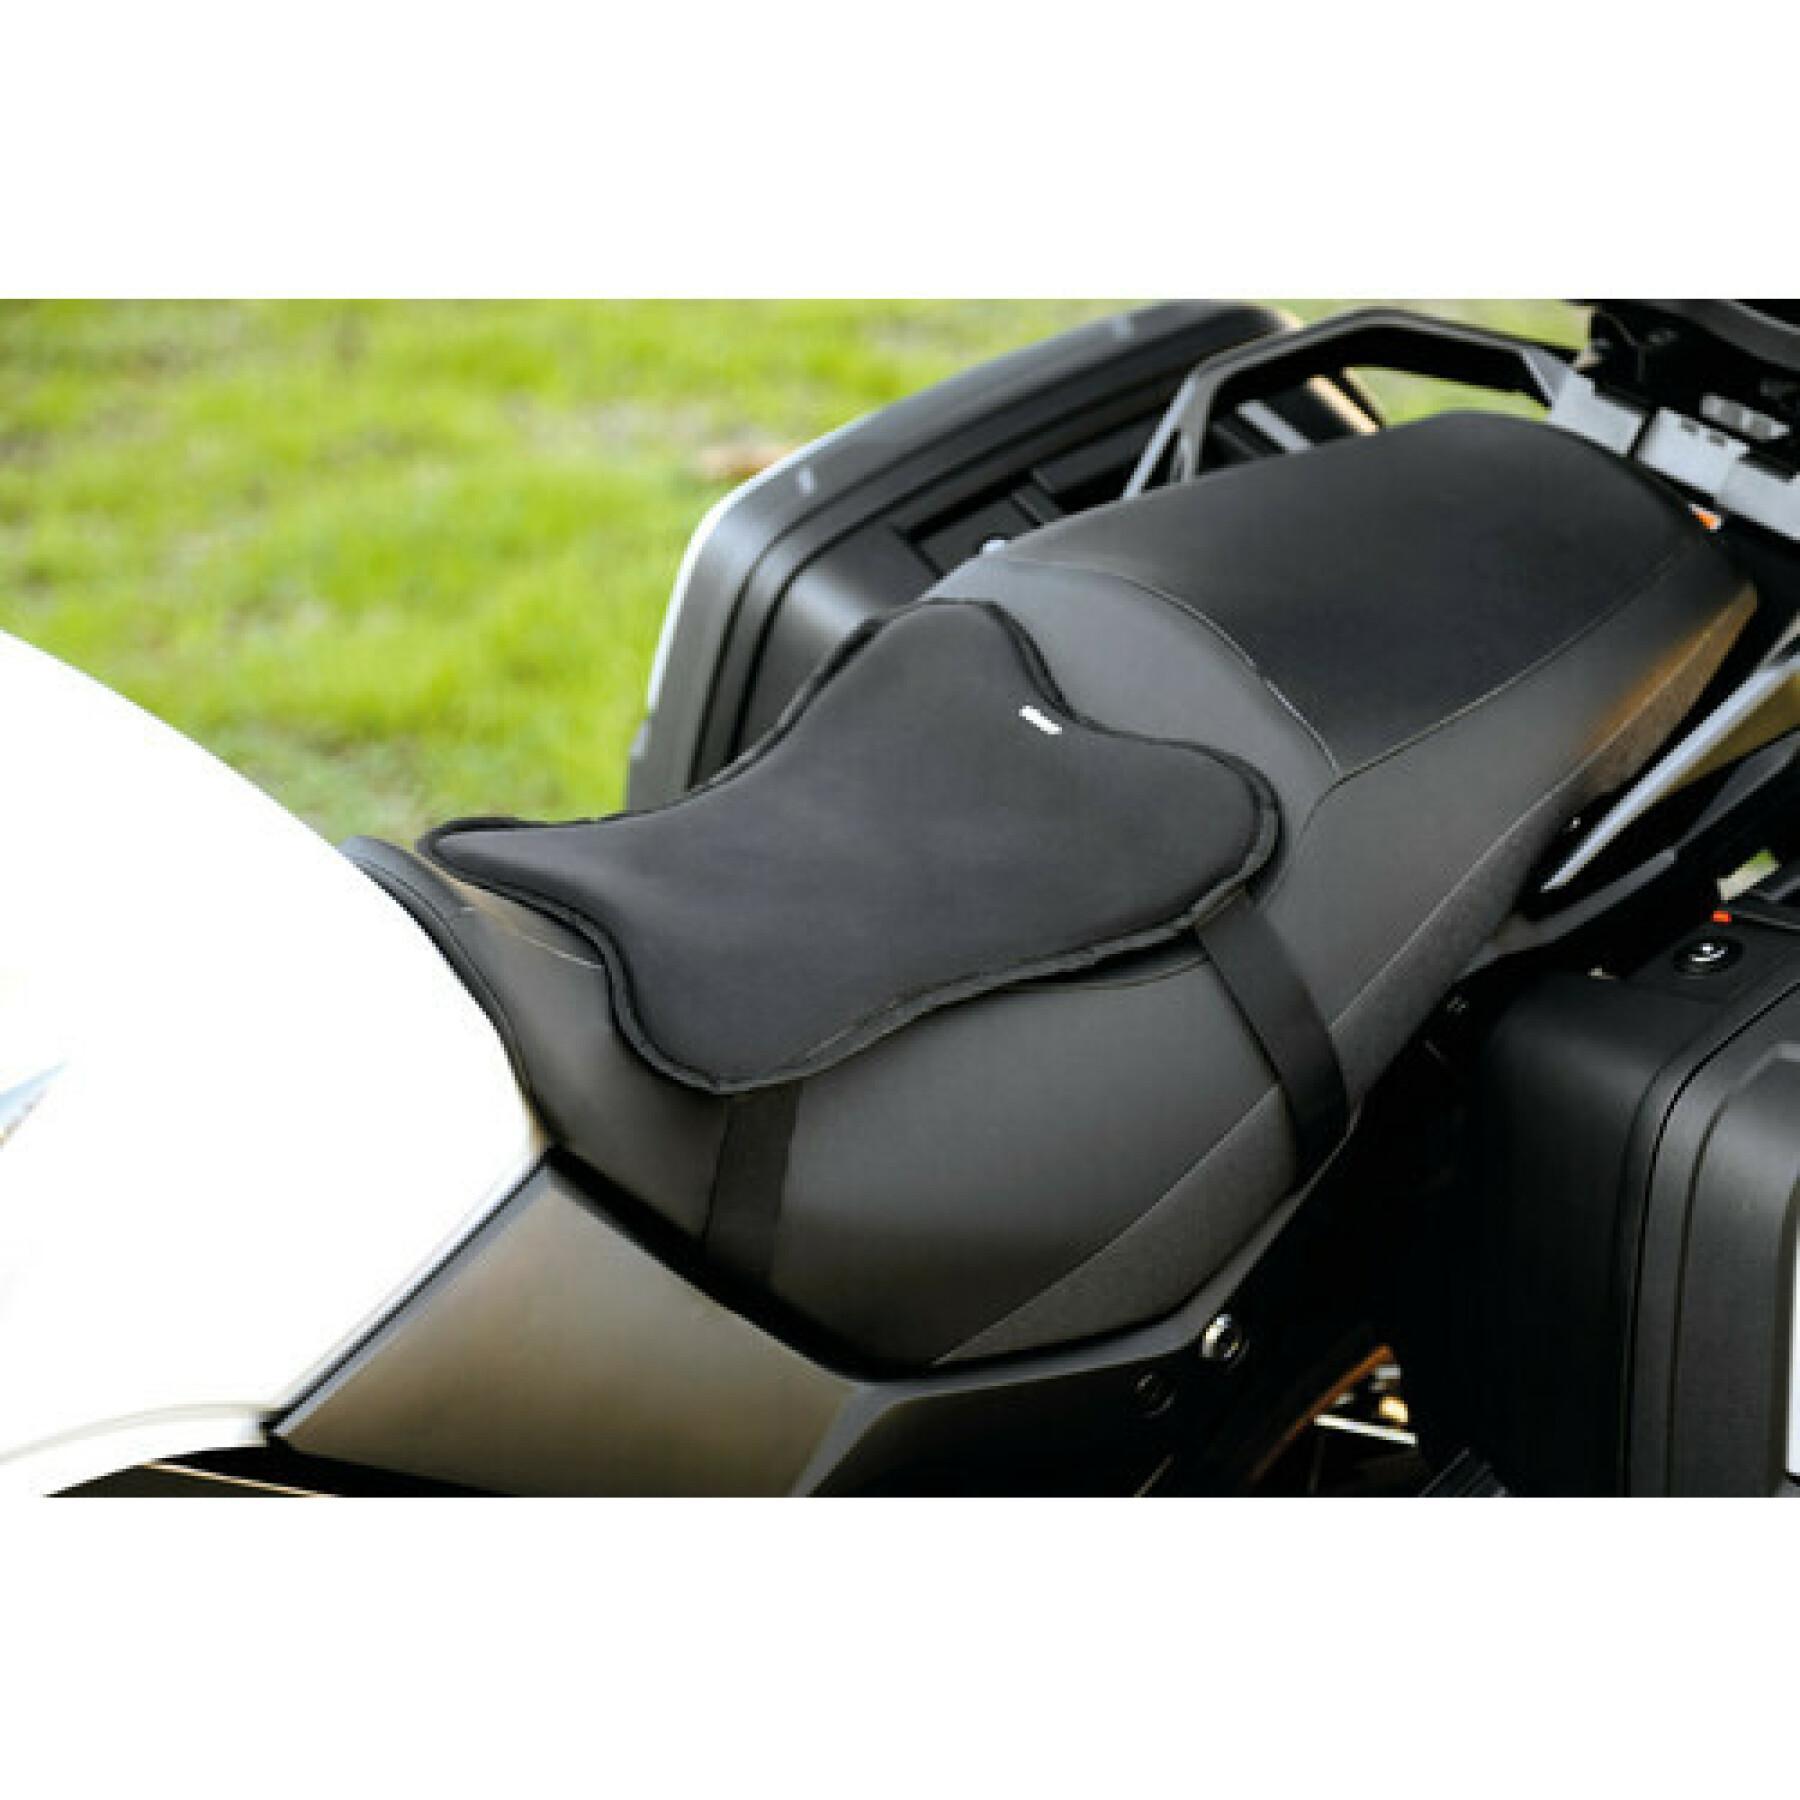 Gel cushion for motorcycles and scooters Lampa XL